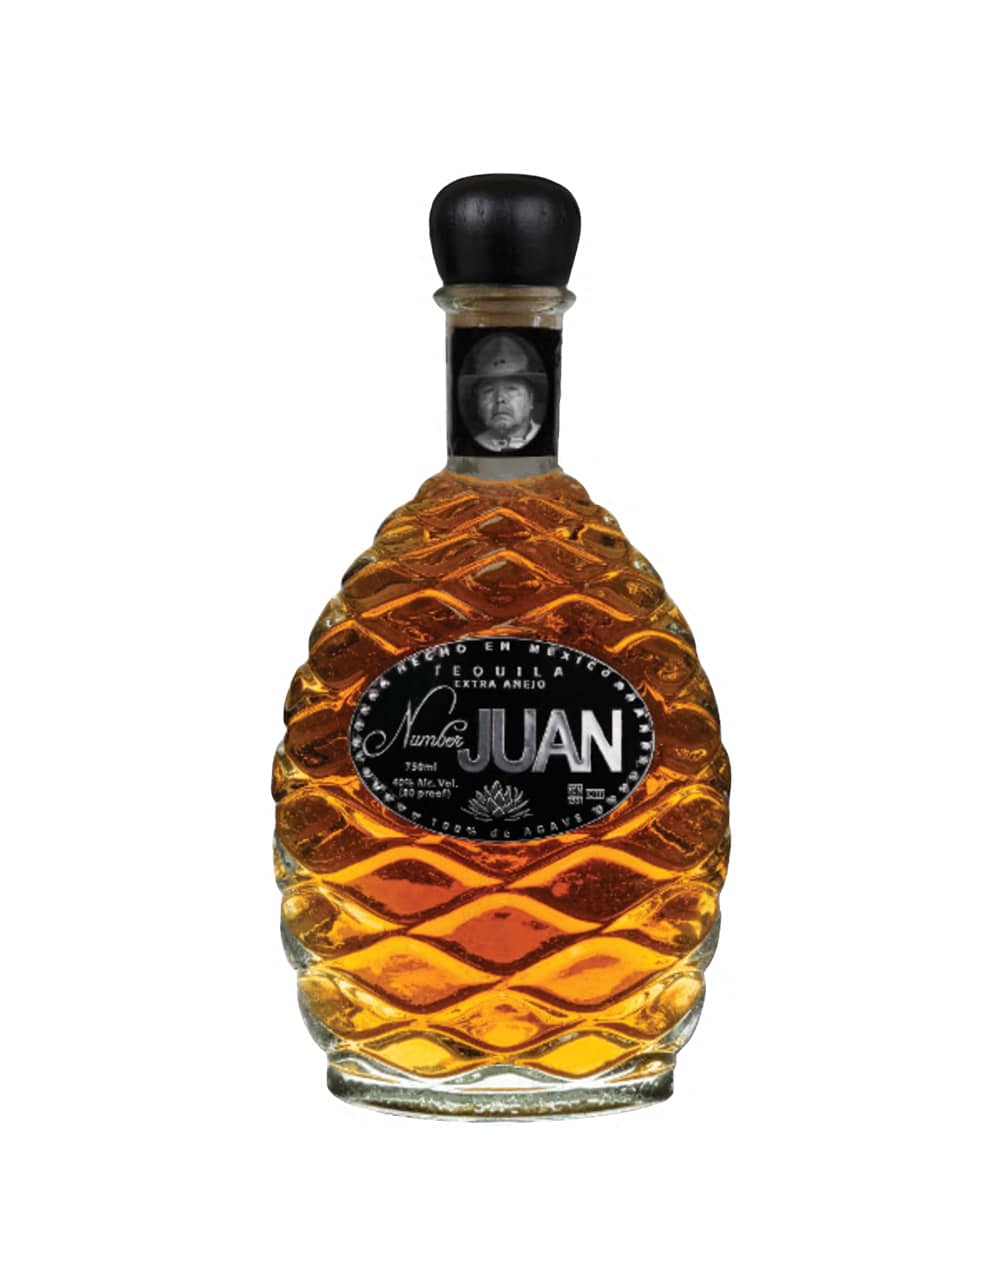 Number Juan Extra Anejo Tequila